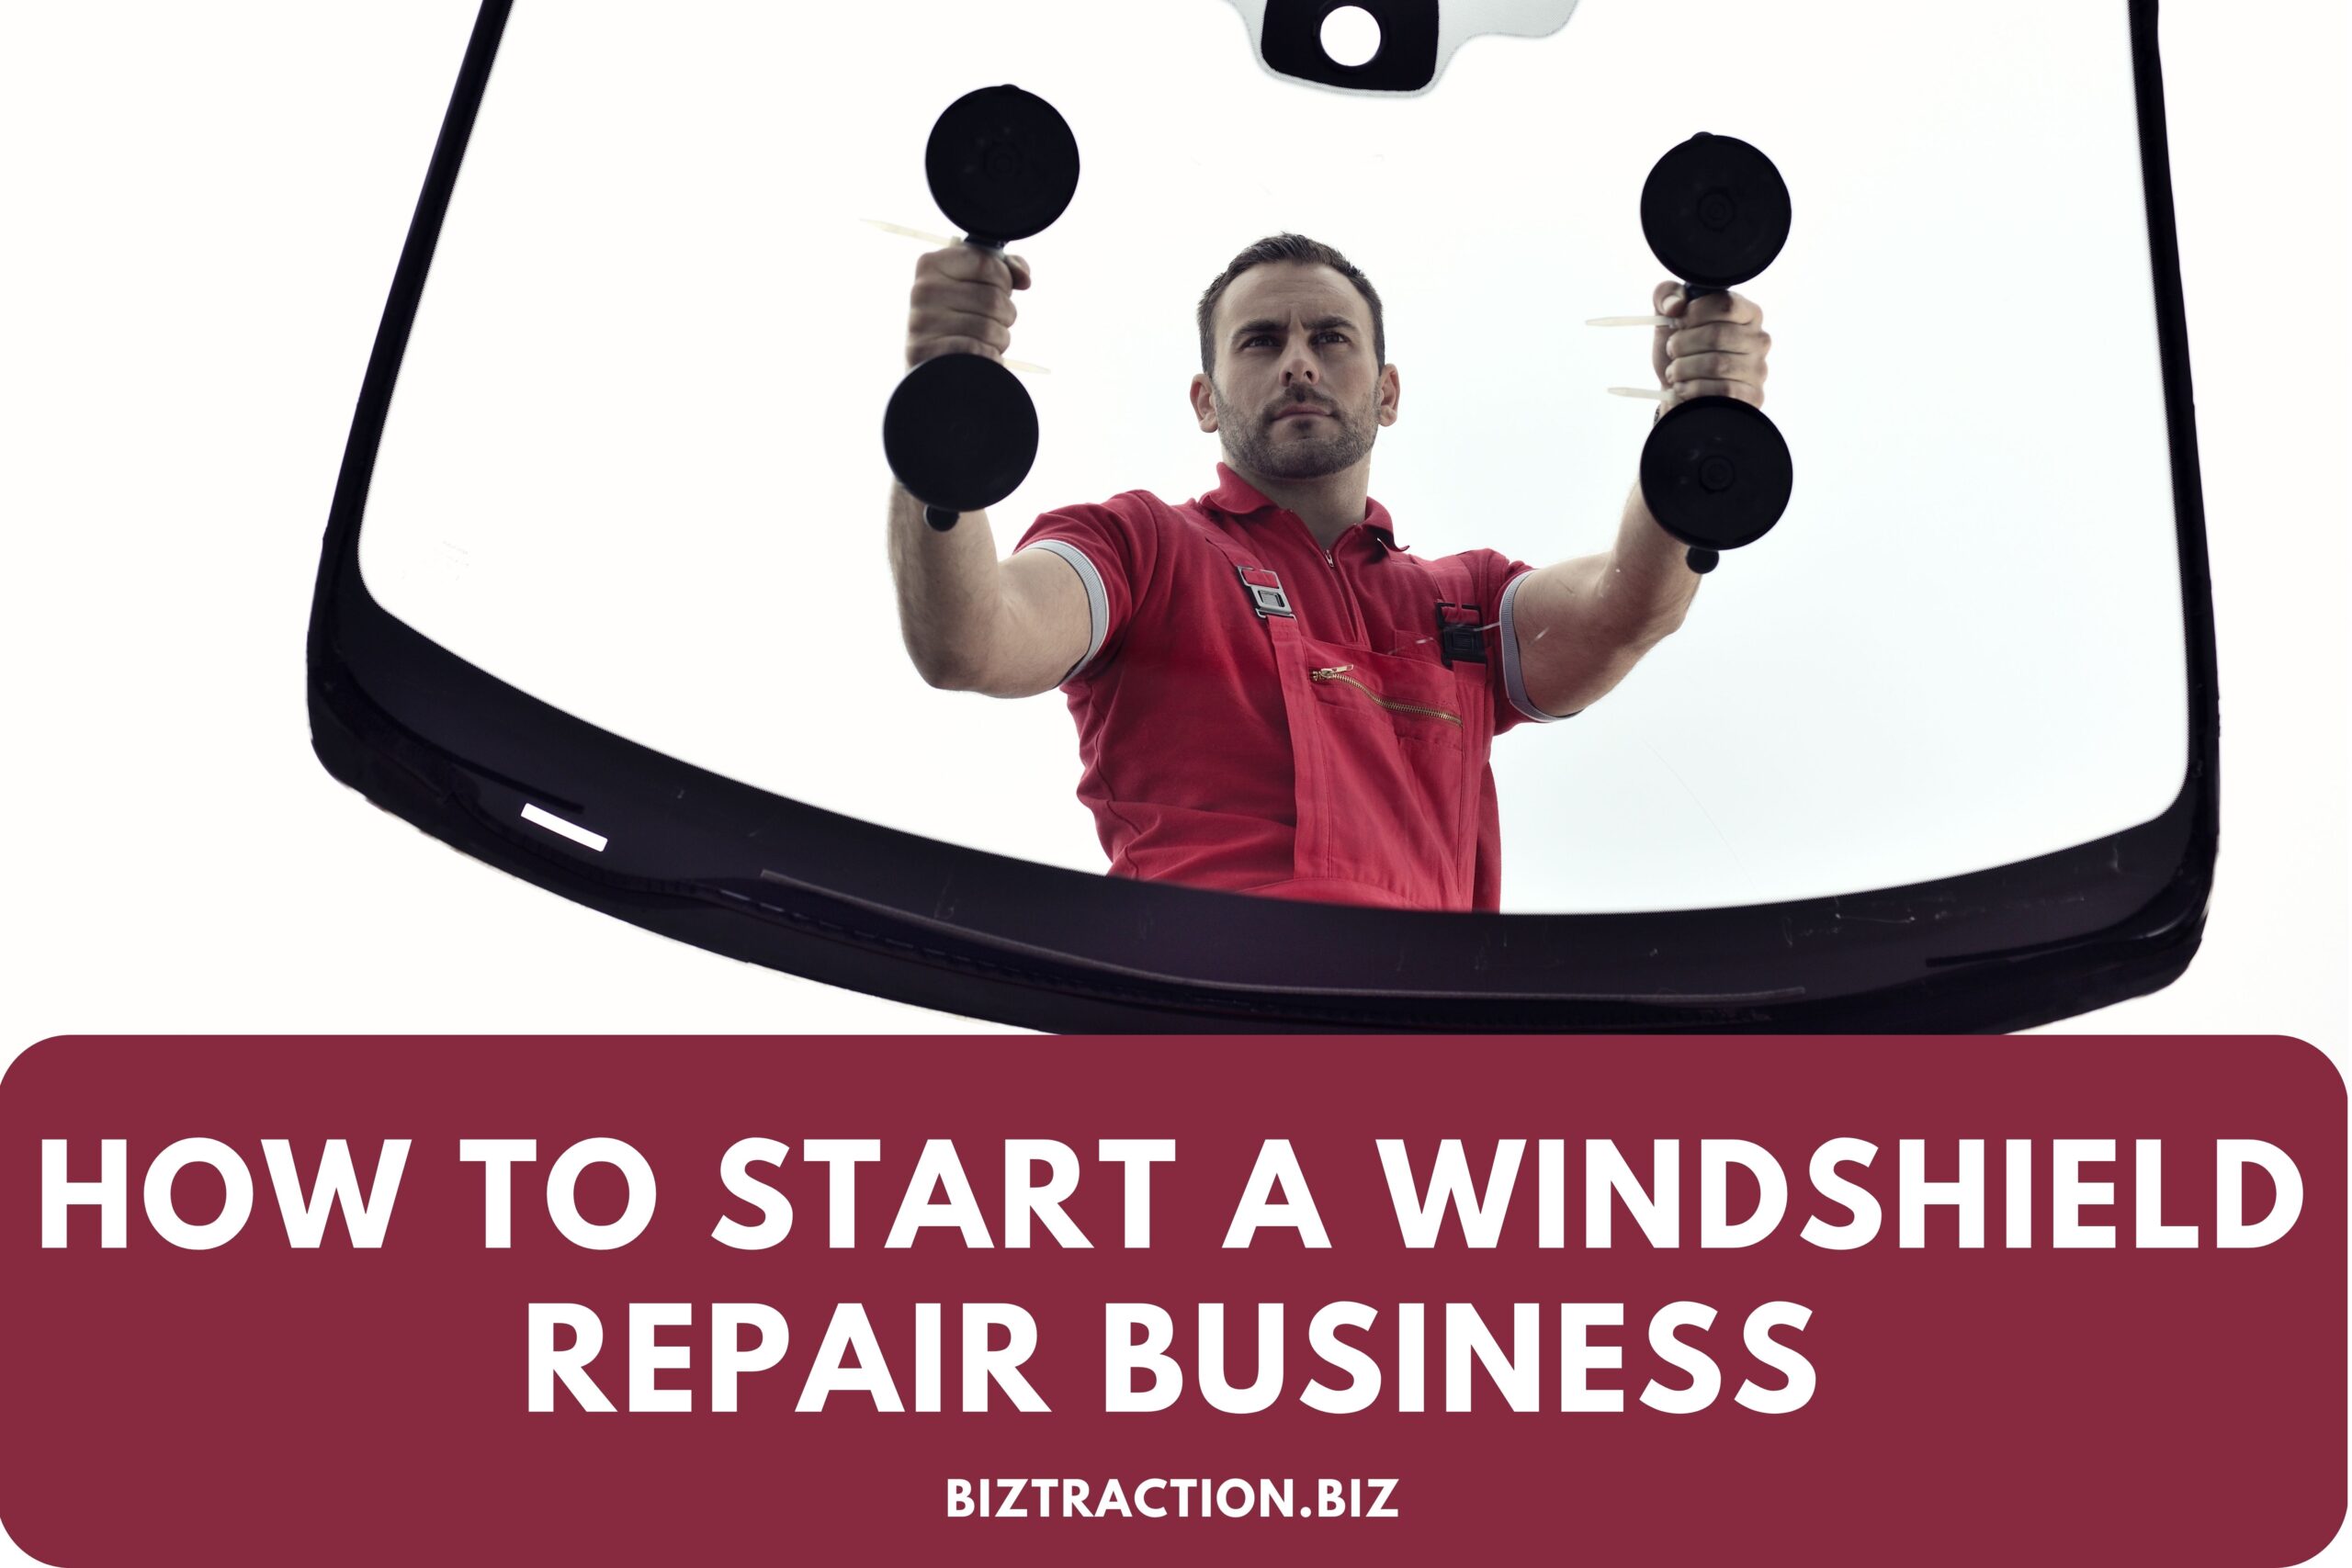 How to Start a Windshield Repair Business